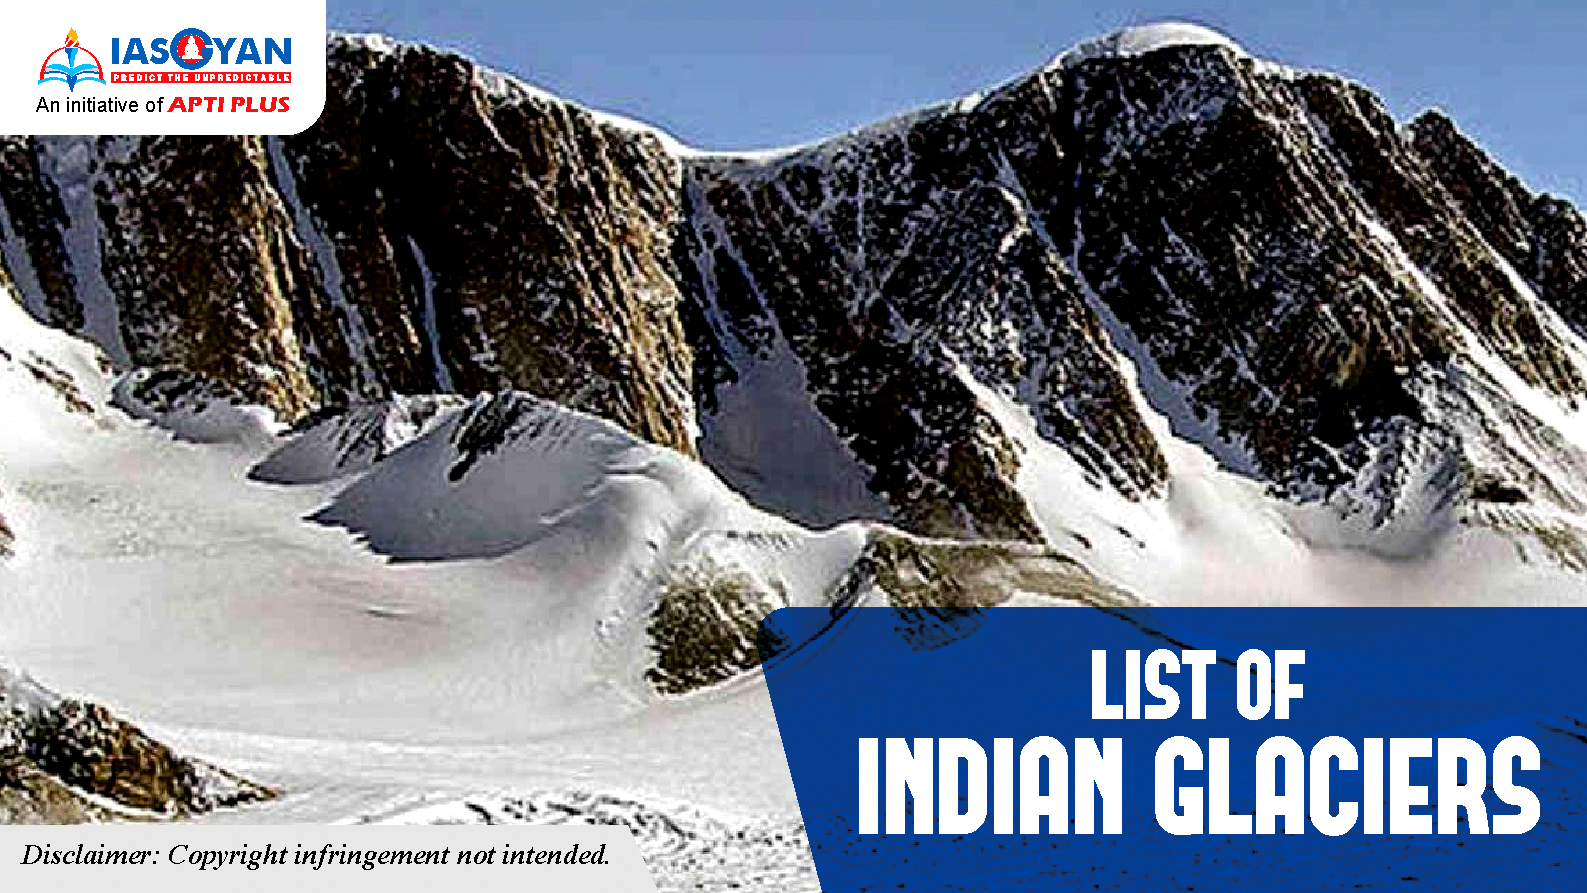 LIST OF INDIAN GLACIERS